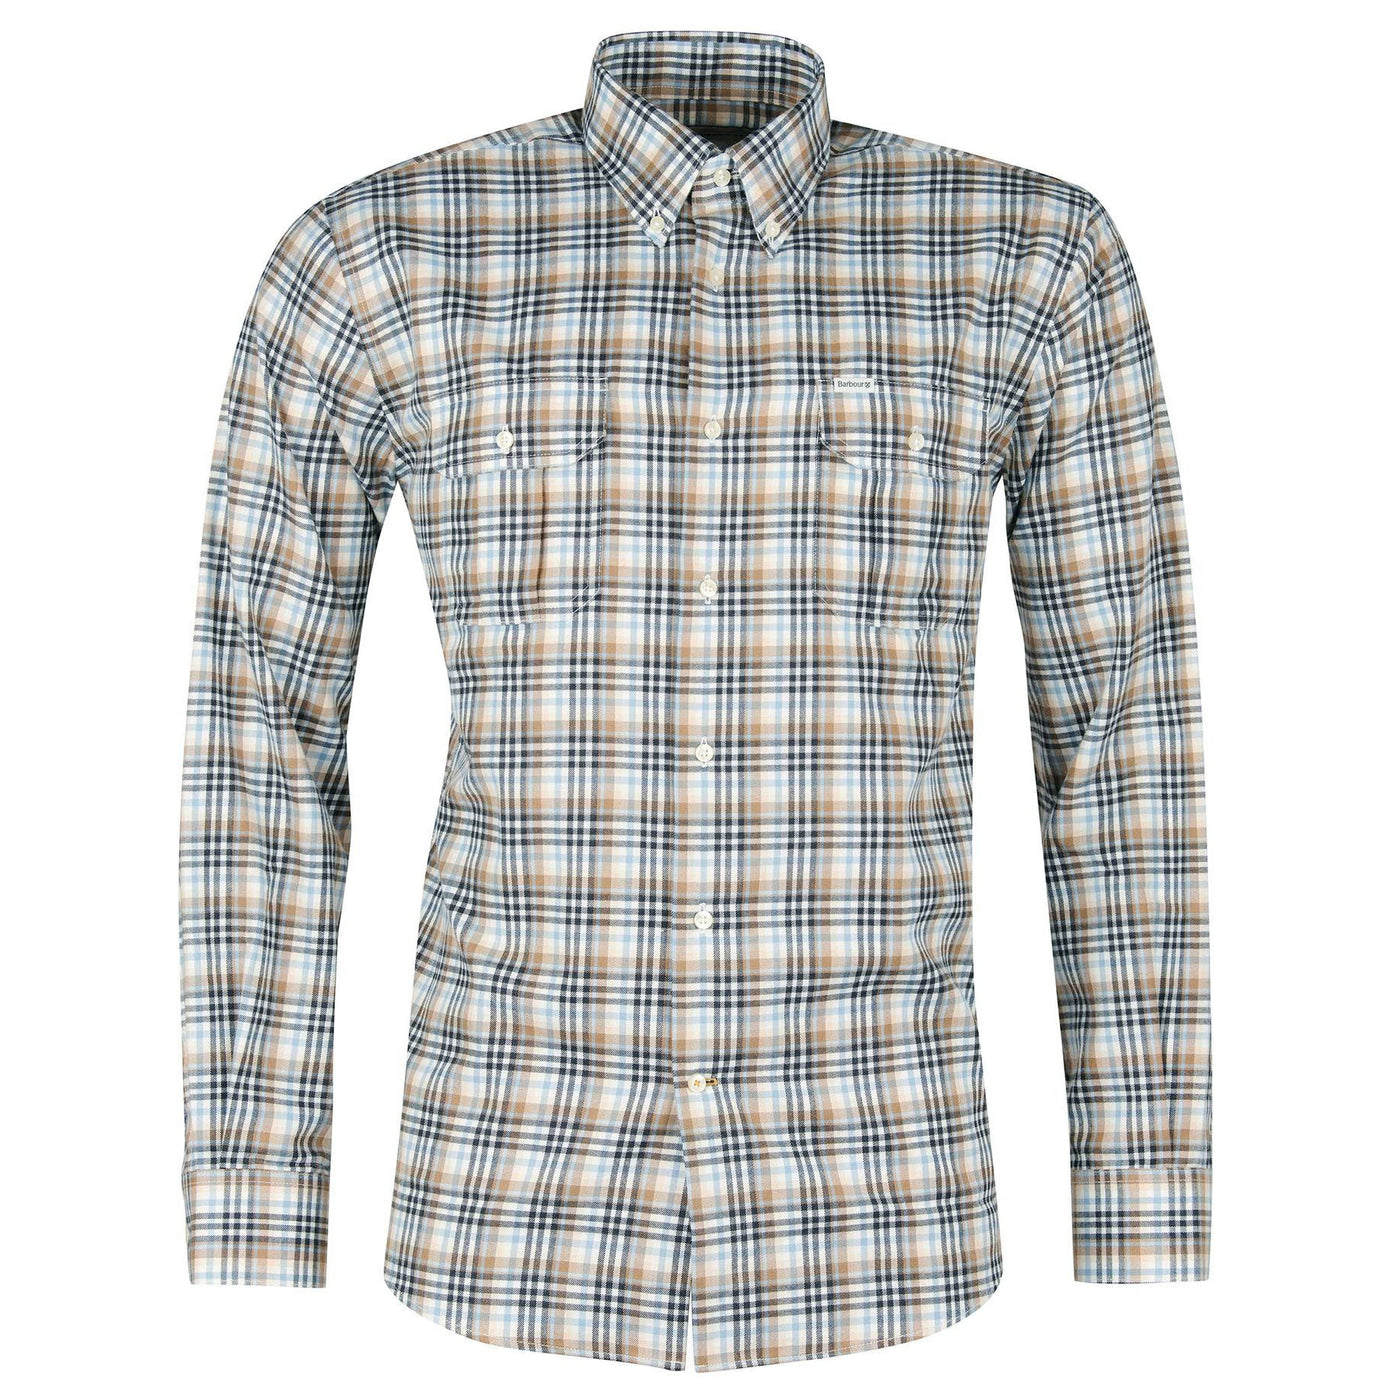 Barbour Eastwood Thermo Weave Shirt-STONE-S-Kevin's Fine Outdoor Gear & Apparel